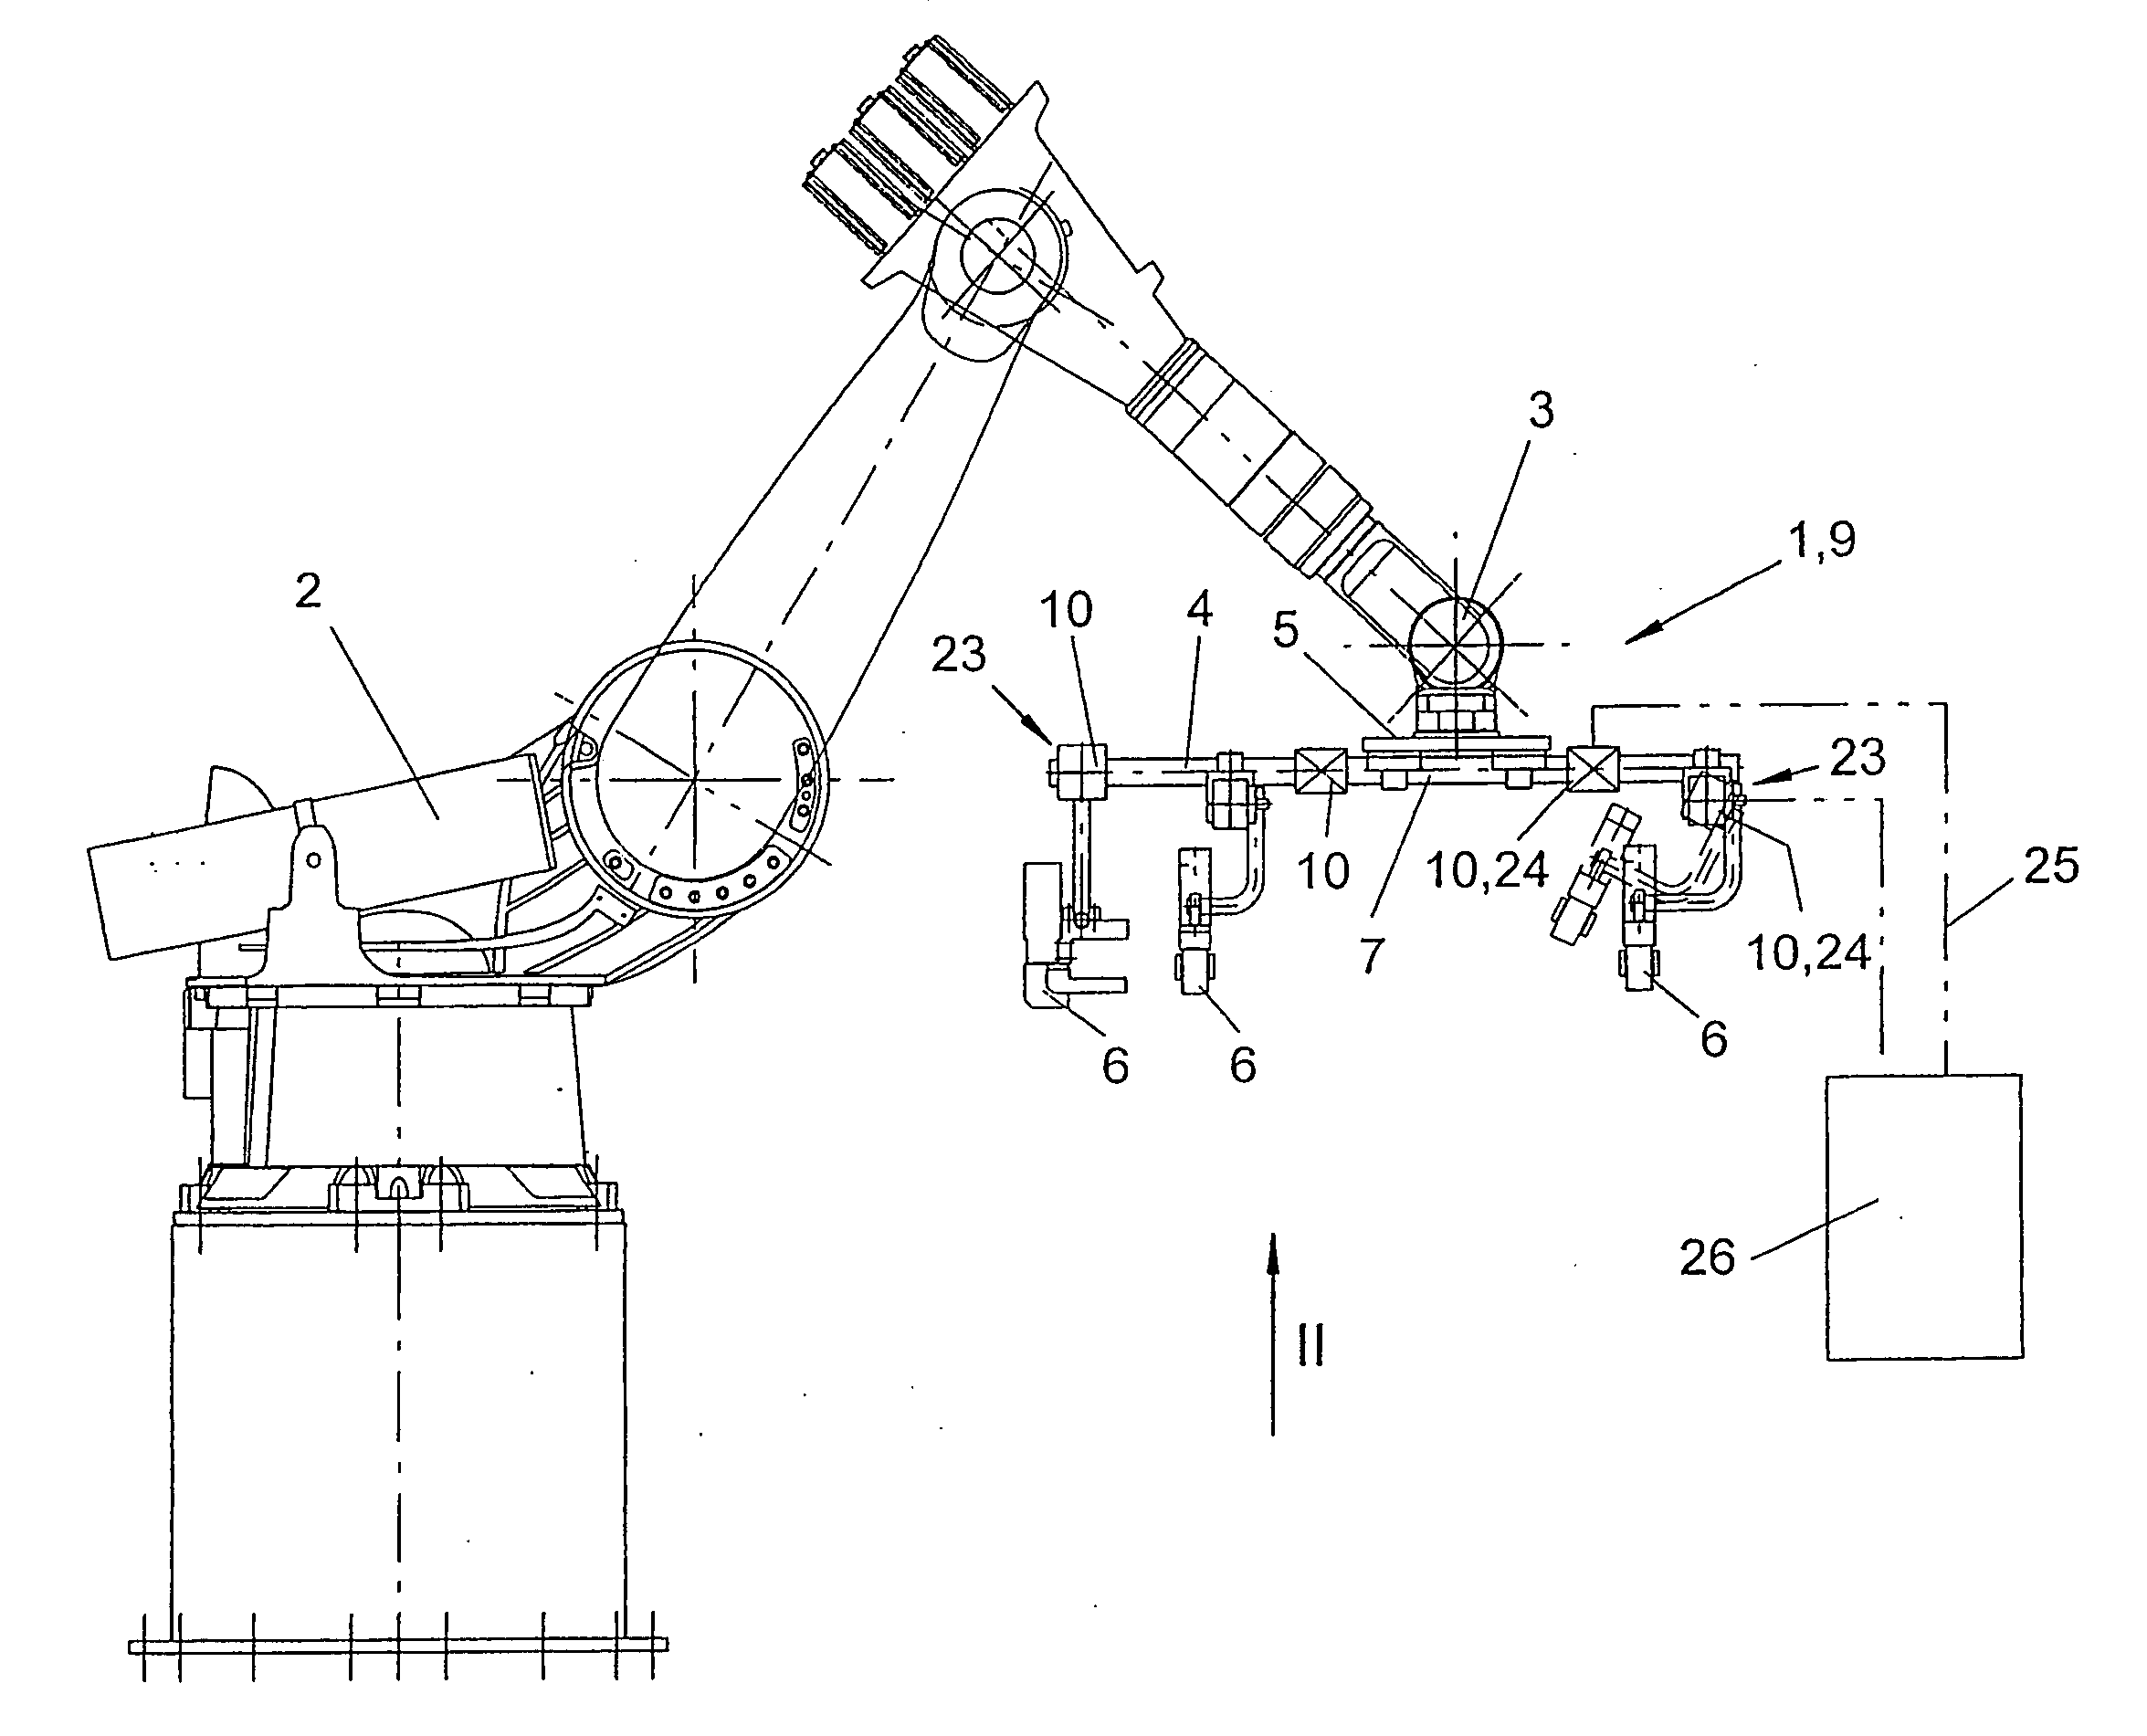 Manipulator-guided gripping device having a deflection safety device that can prevent collisions